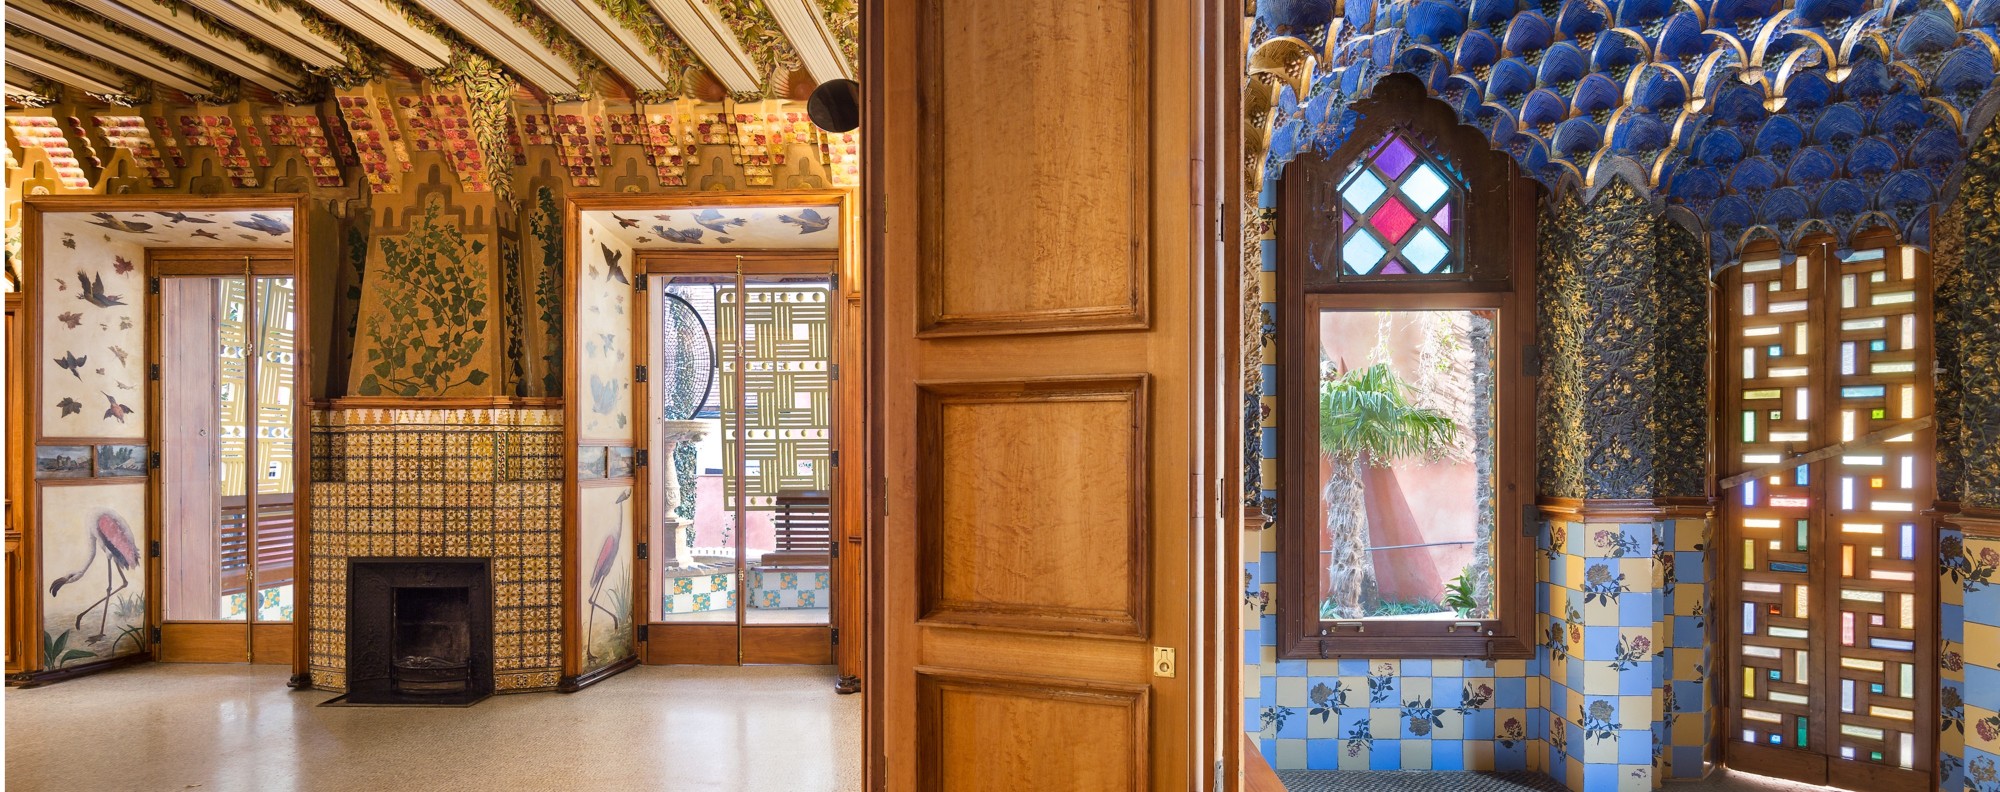 Inside Gaudí’s first house: 130-year-old Casa Vicens opens ...
